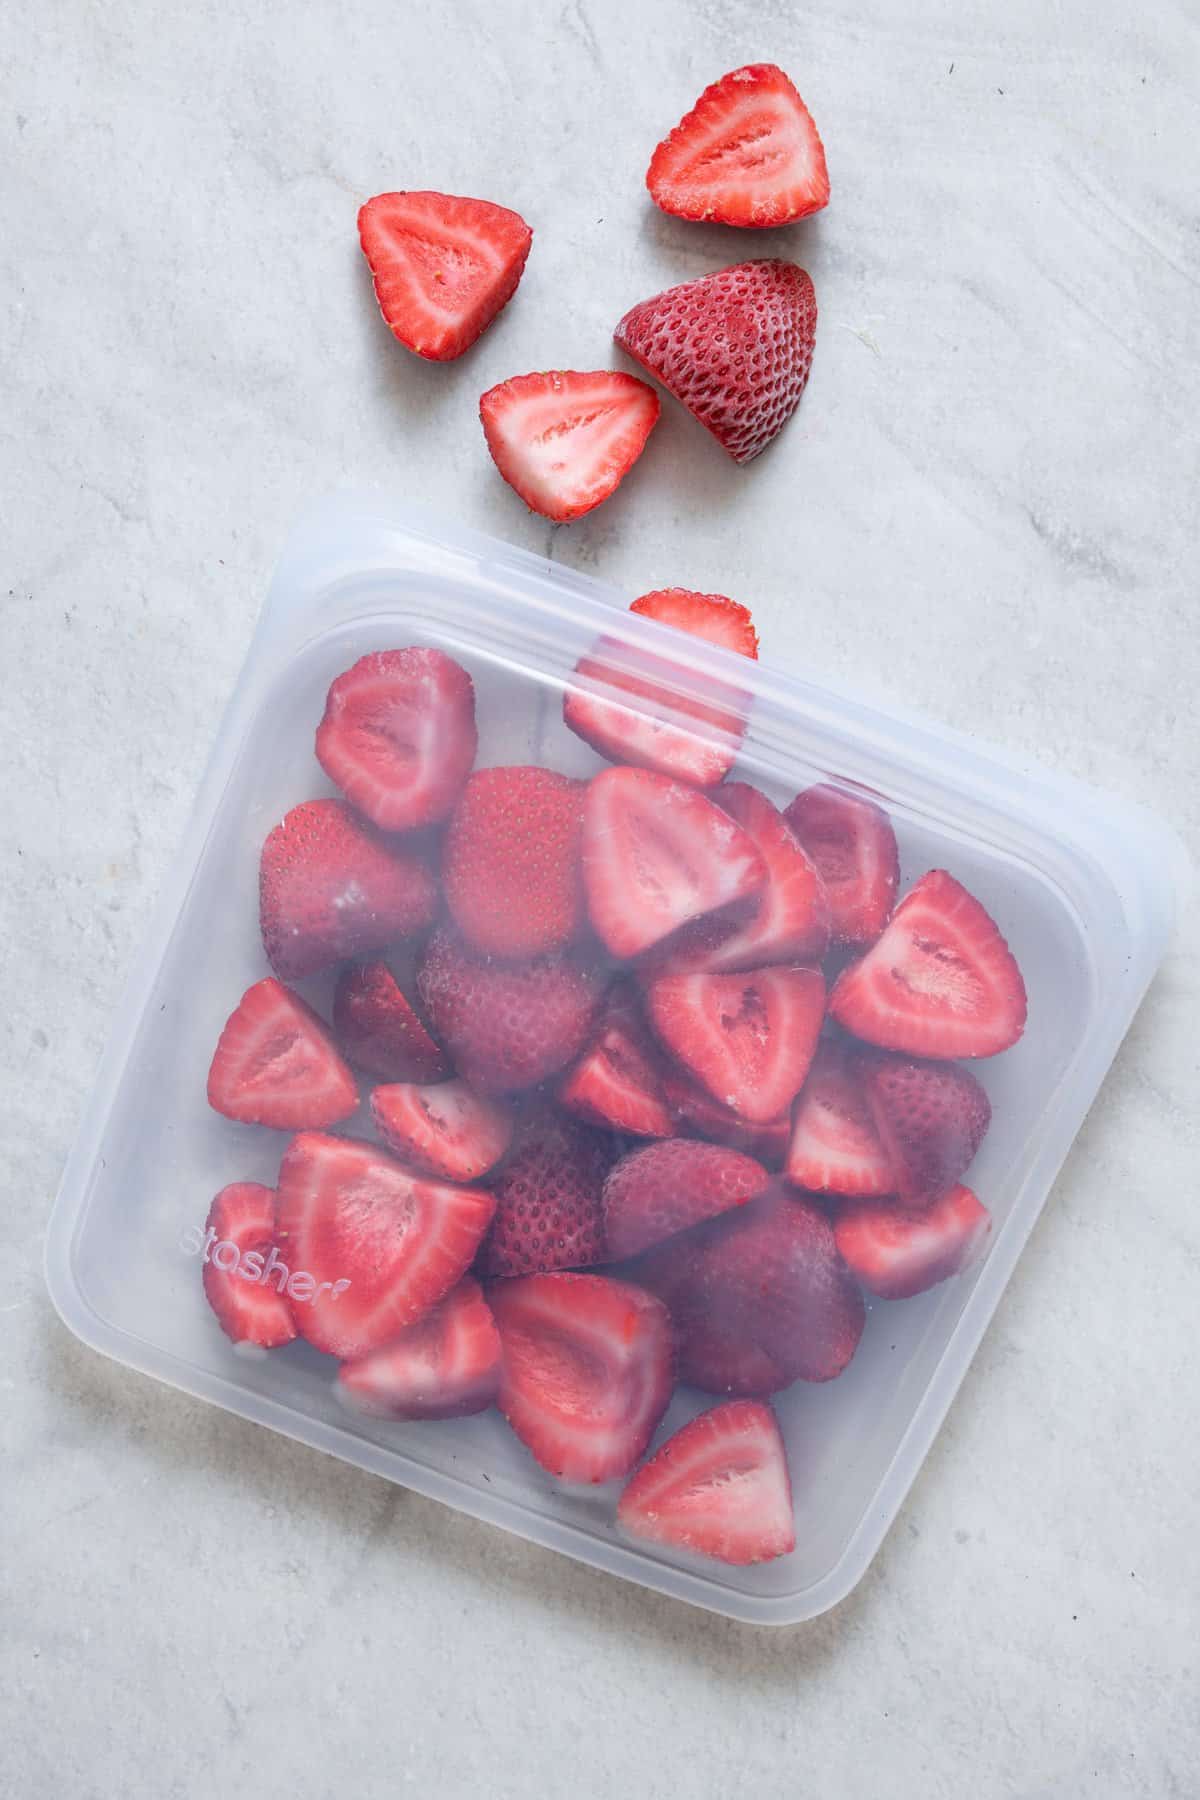 Frozen strawberries in a clear silicone bag laying on surface with a couple coming out.